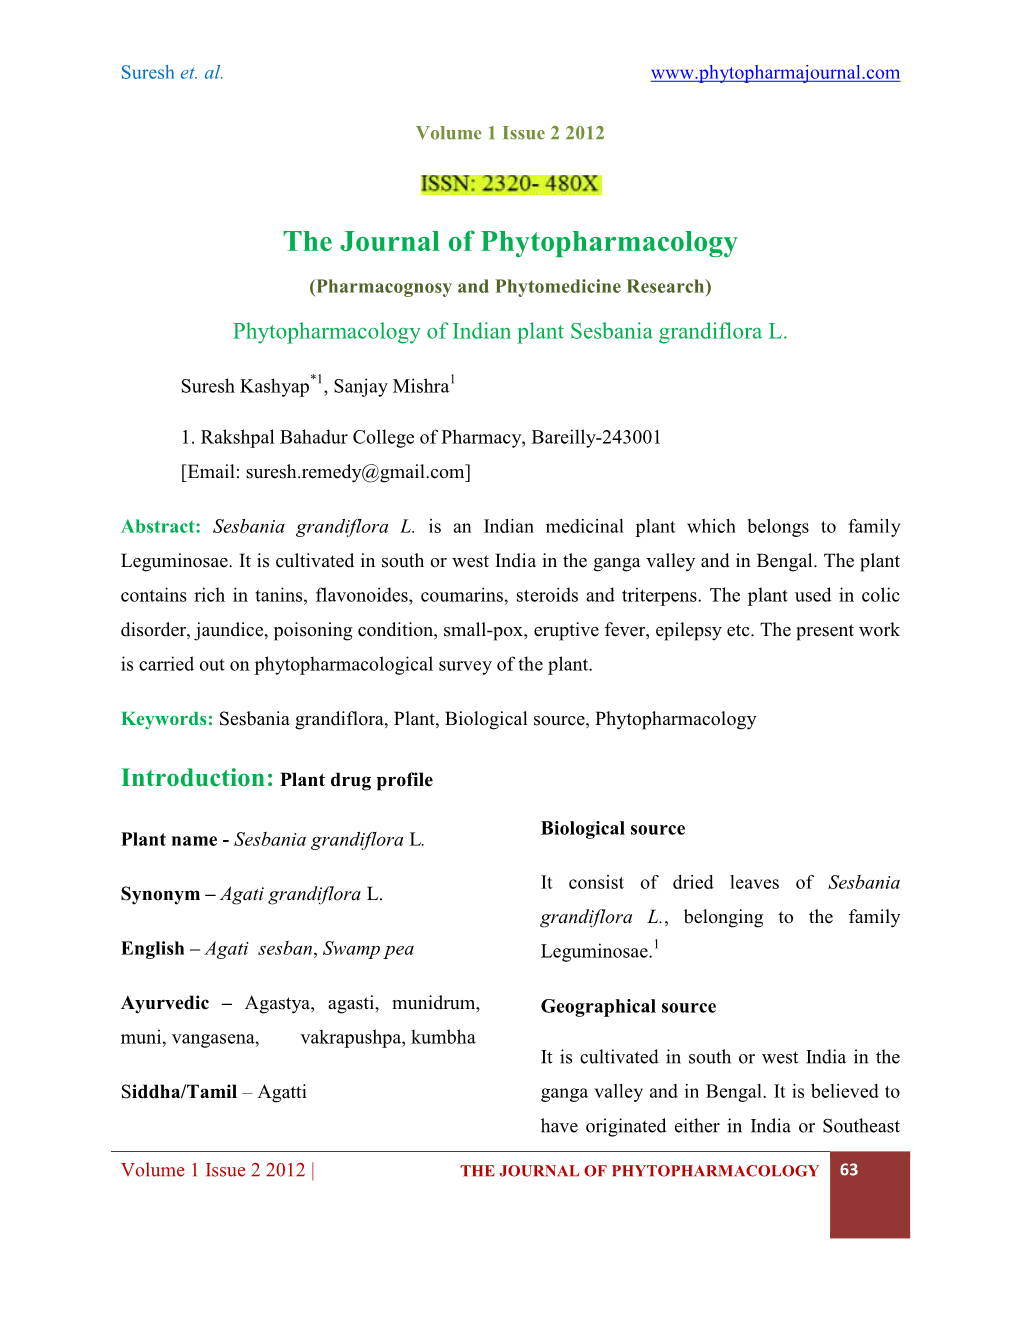 The Journal of Phytopharmacology (Pharmacognosy and Phytomedicine Research) Phytopharmacology of Indian Plant Sesbania Grandiflora L